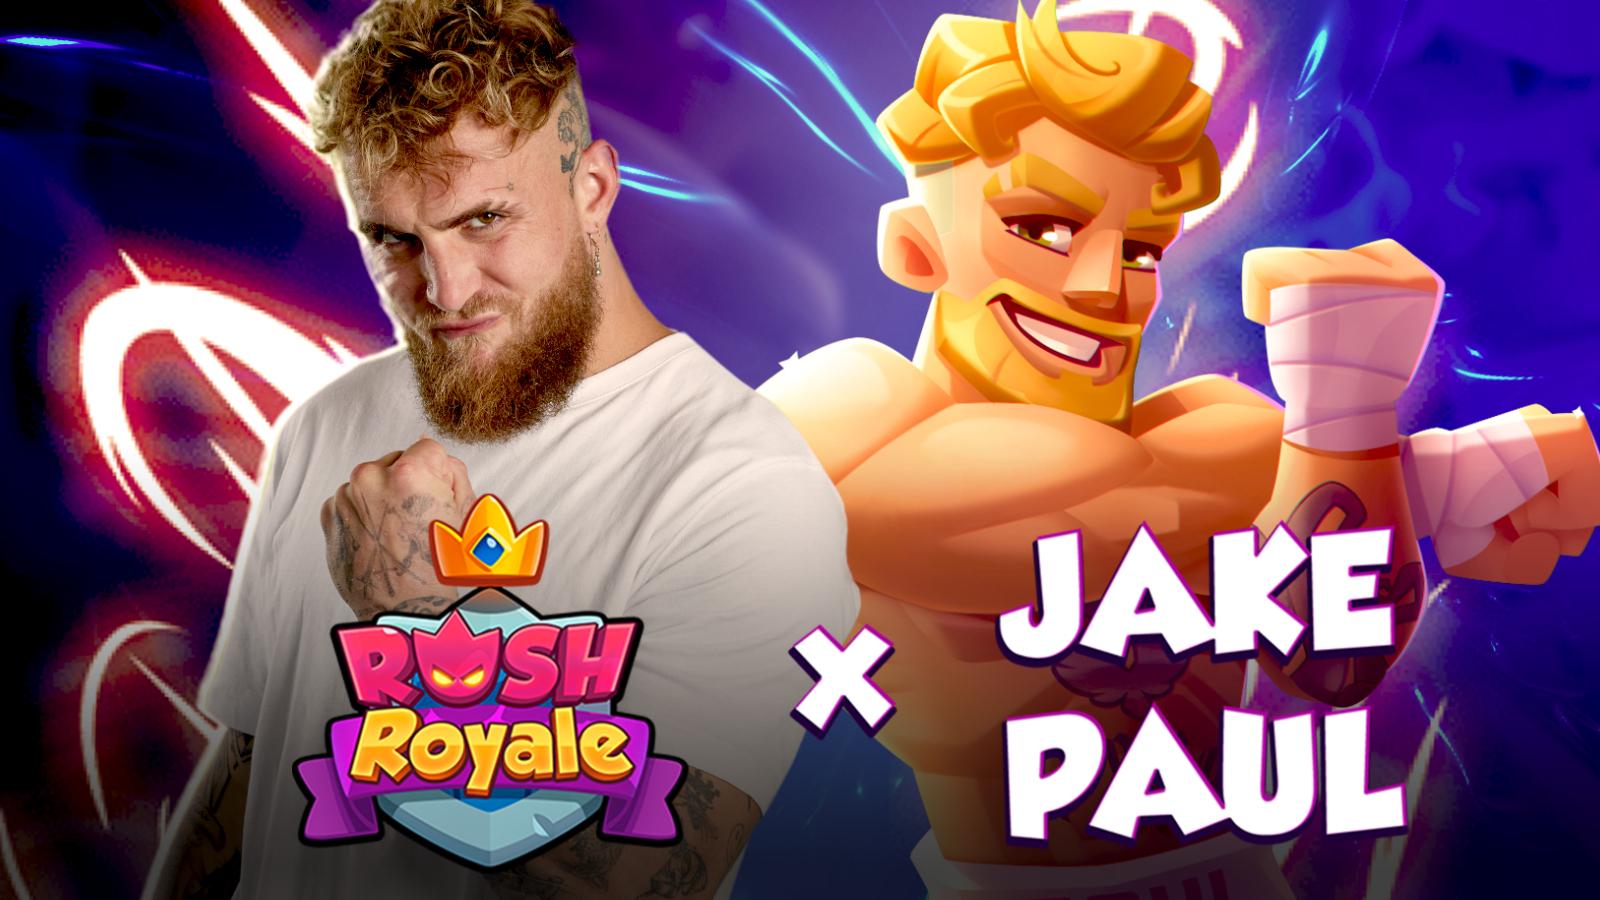 Jake Paul crossover with Rush Royale